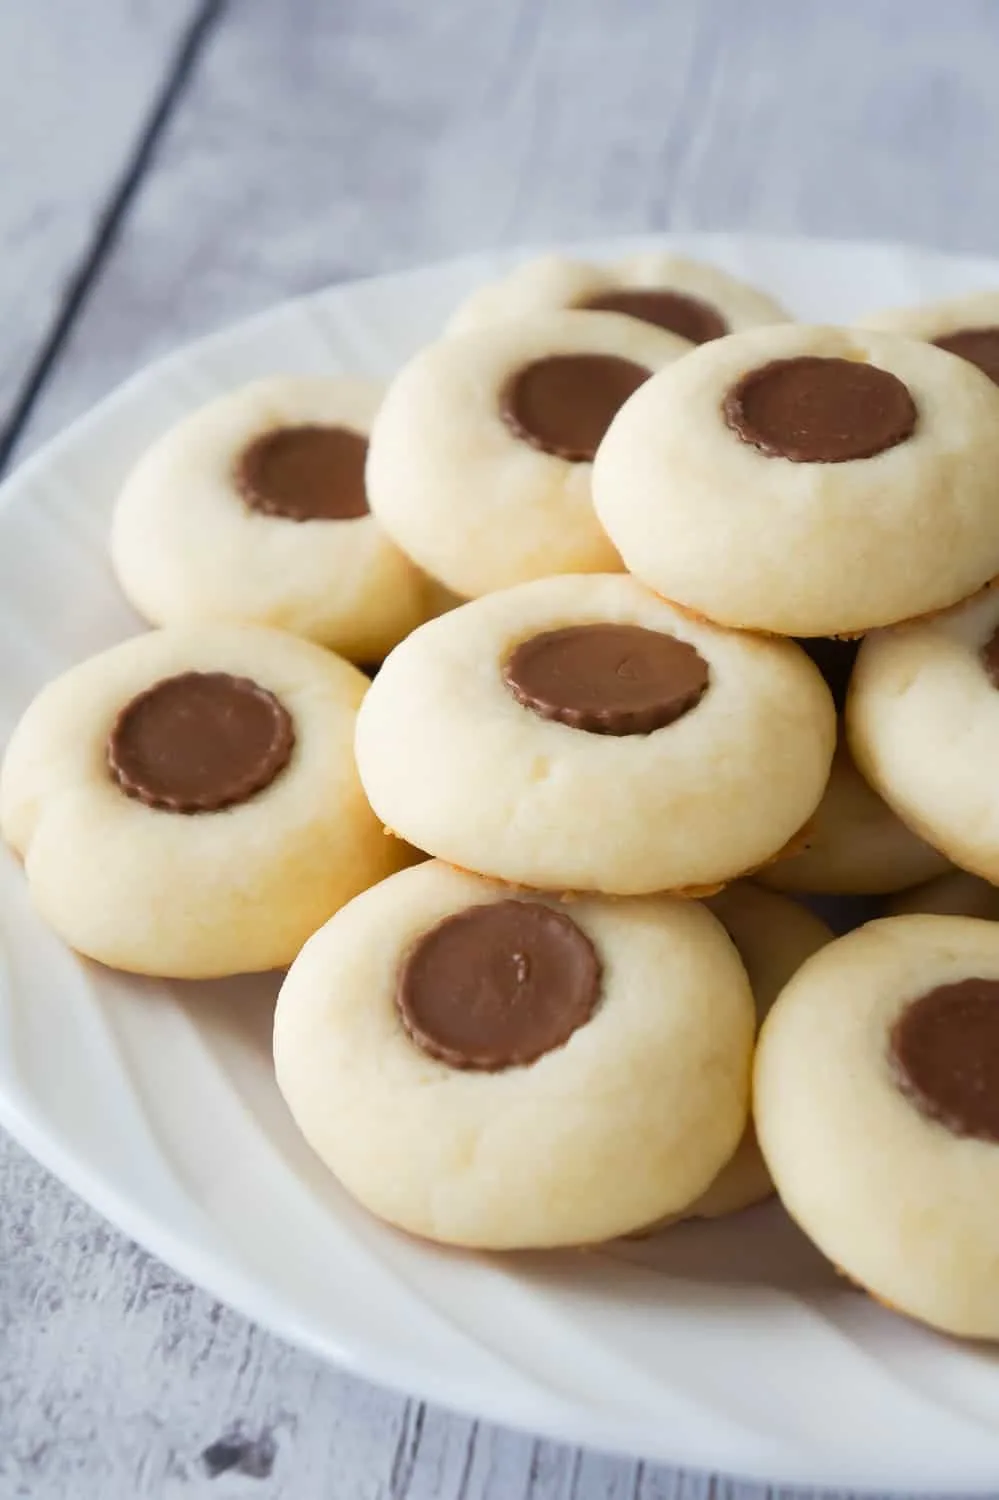 Whipped Shortbread with Peanut Butter Cups is an easy cookie recipe perfect for the holidays. These classic whipped shortbread cookies topped with Reese's Minis are sure to please the peanut butter lovers in your life.